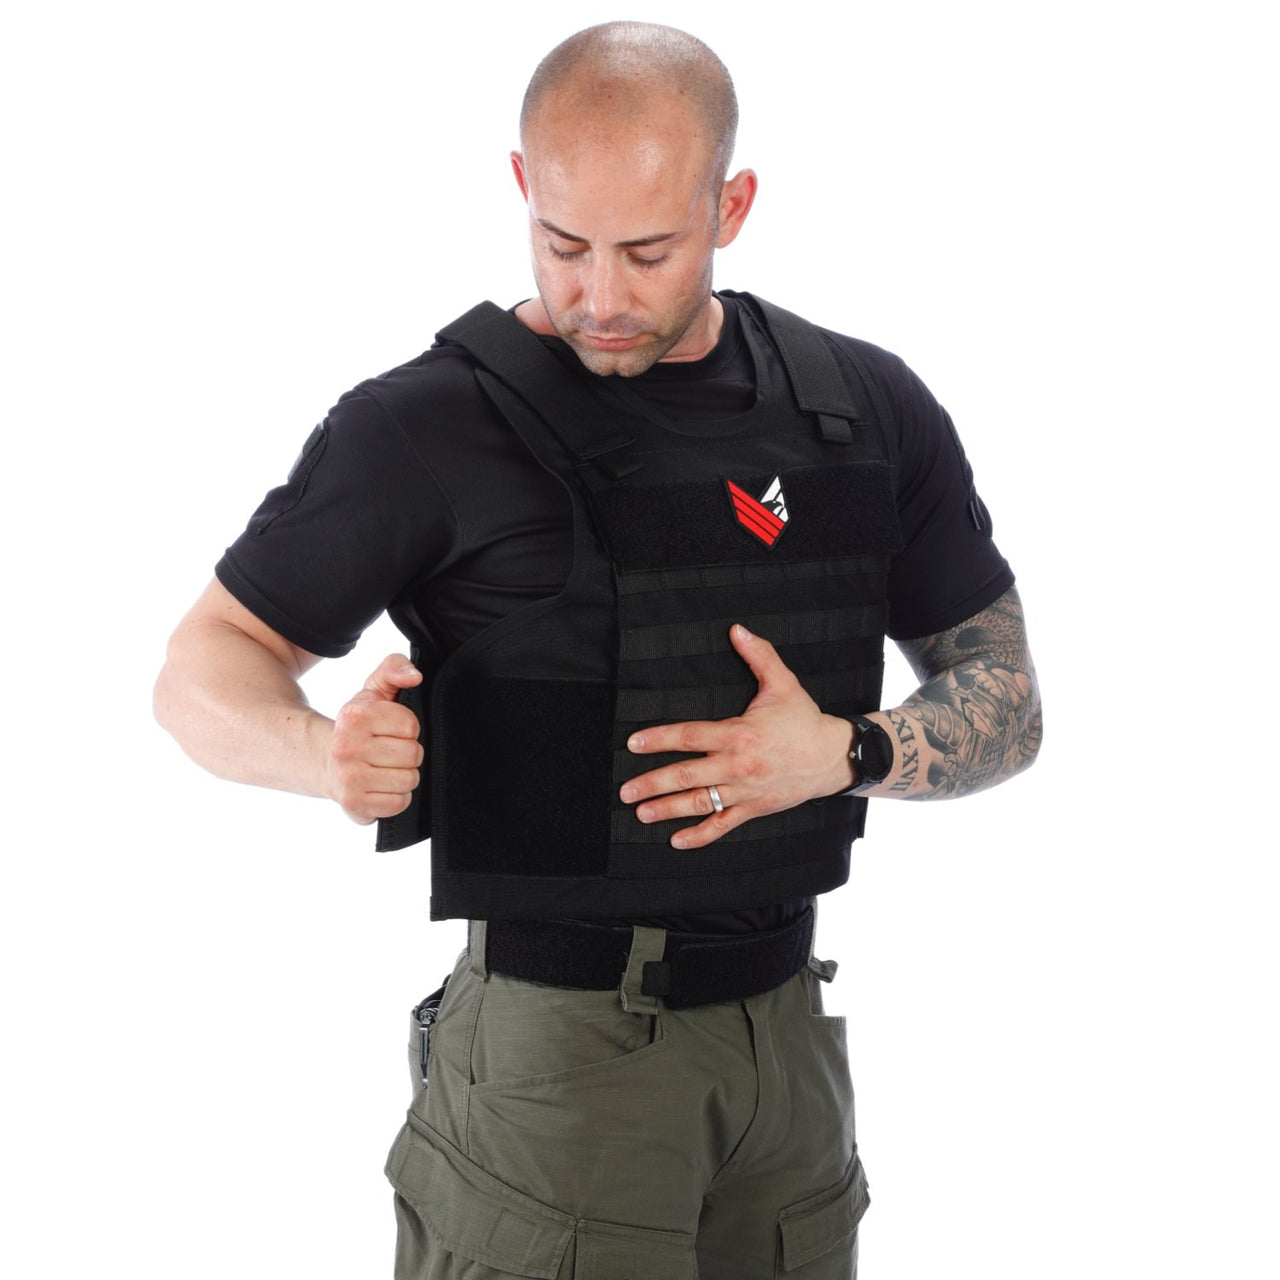 A man wearing the Body Armor Direct All Star Tactical Enhanced Multi-Threat Vest by Body Armor Direct on a white background.